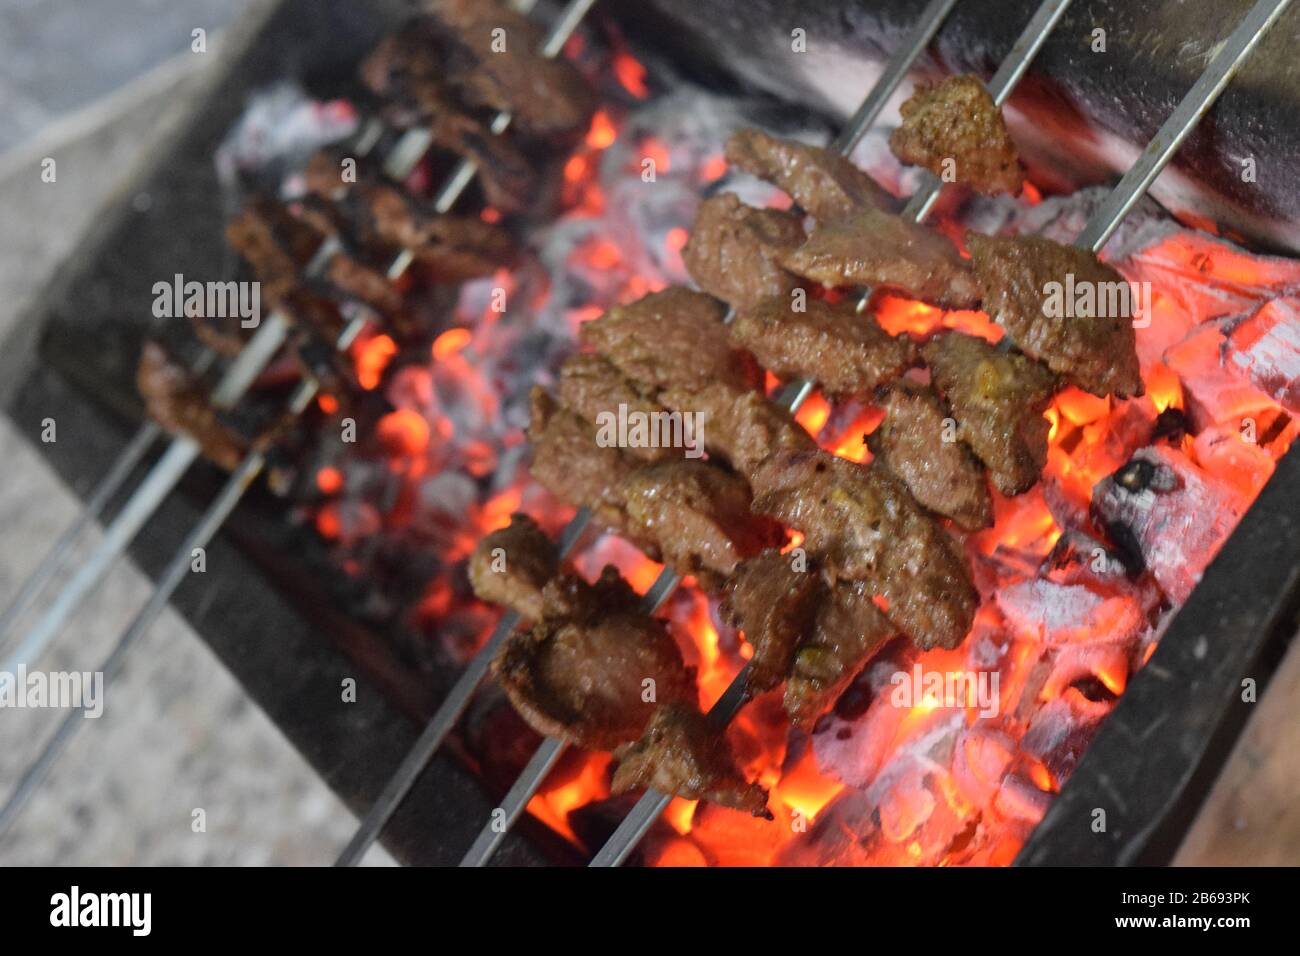 Delicious and juicy  Char-coaled mutton BBQ Stock Photo